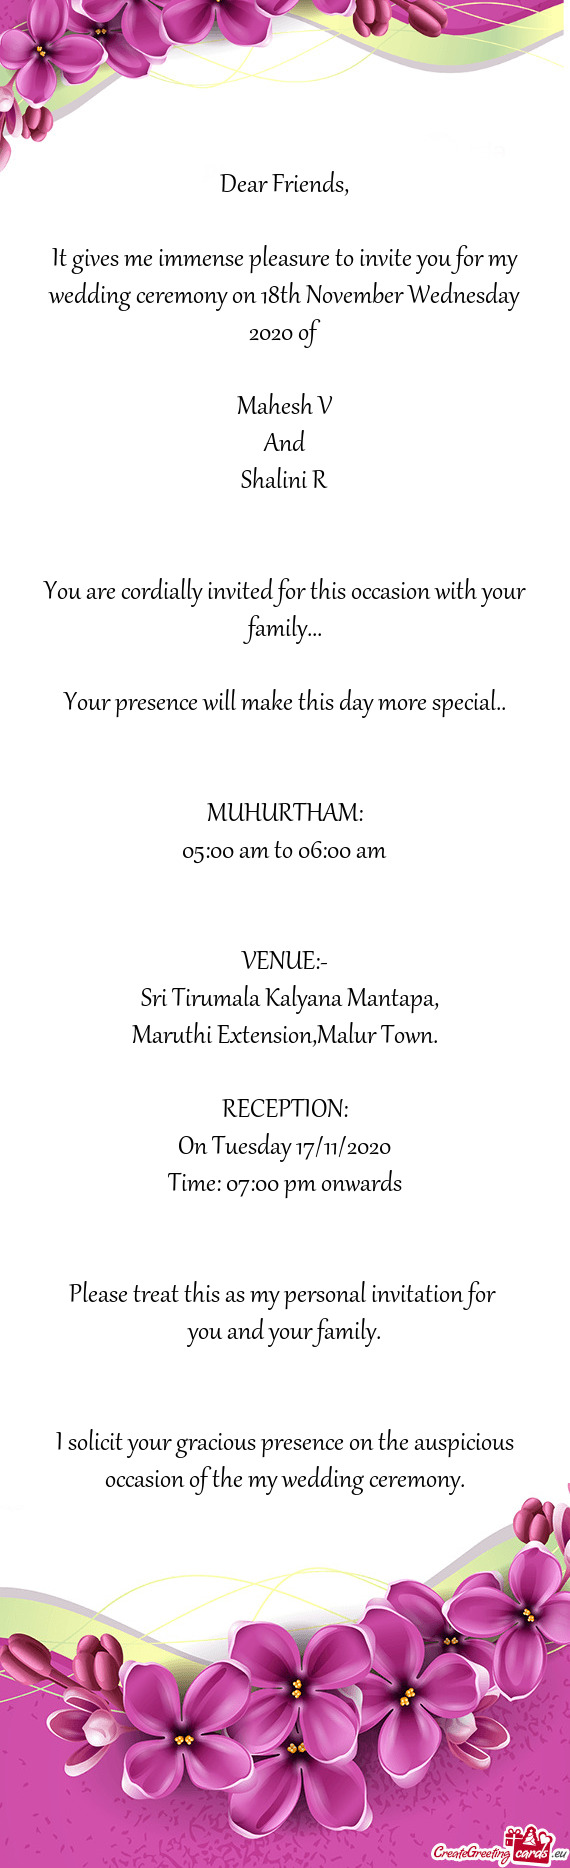 It gives me immense pleasure to invite you for my wedding ceremony on 18th November Wednesday 2020 o